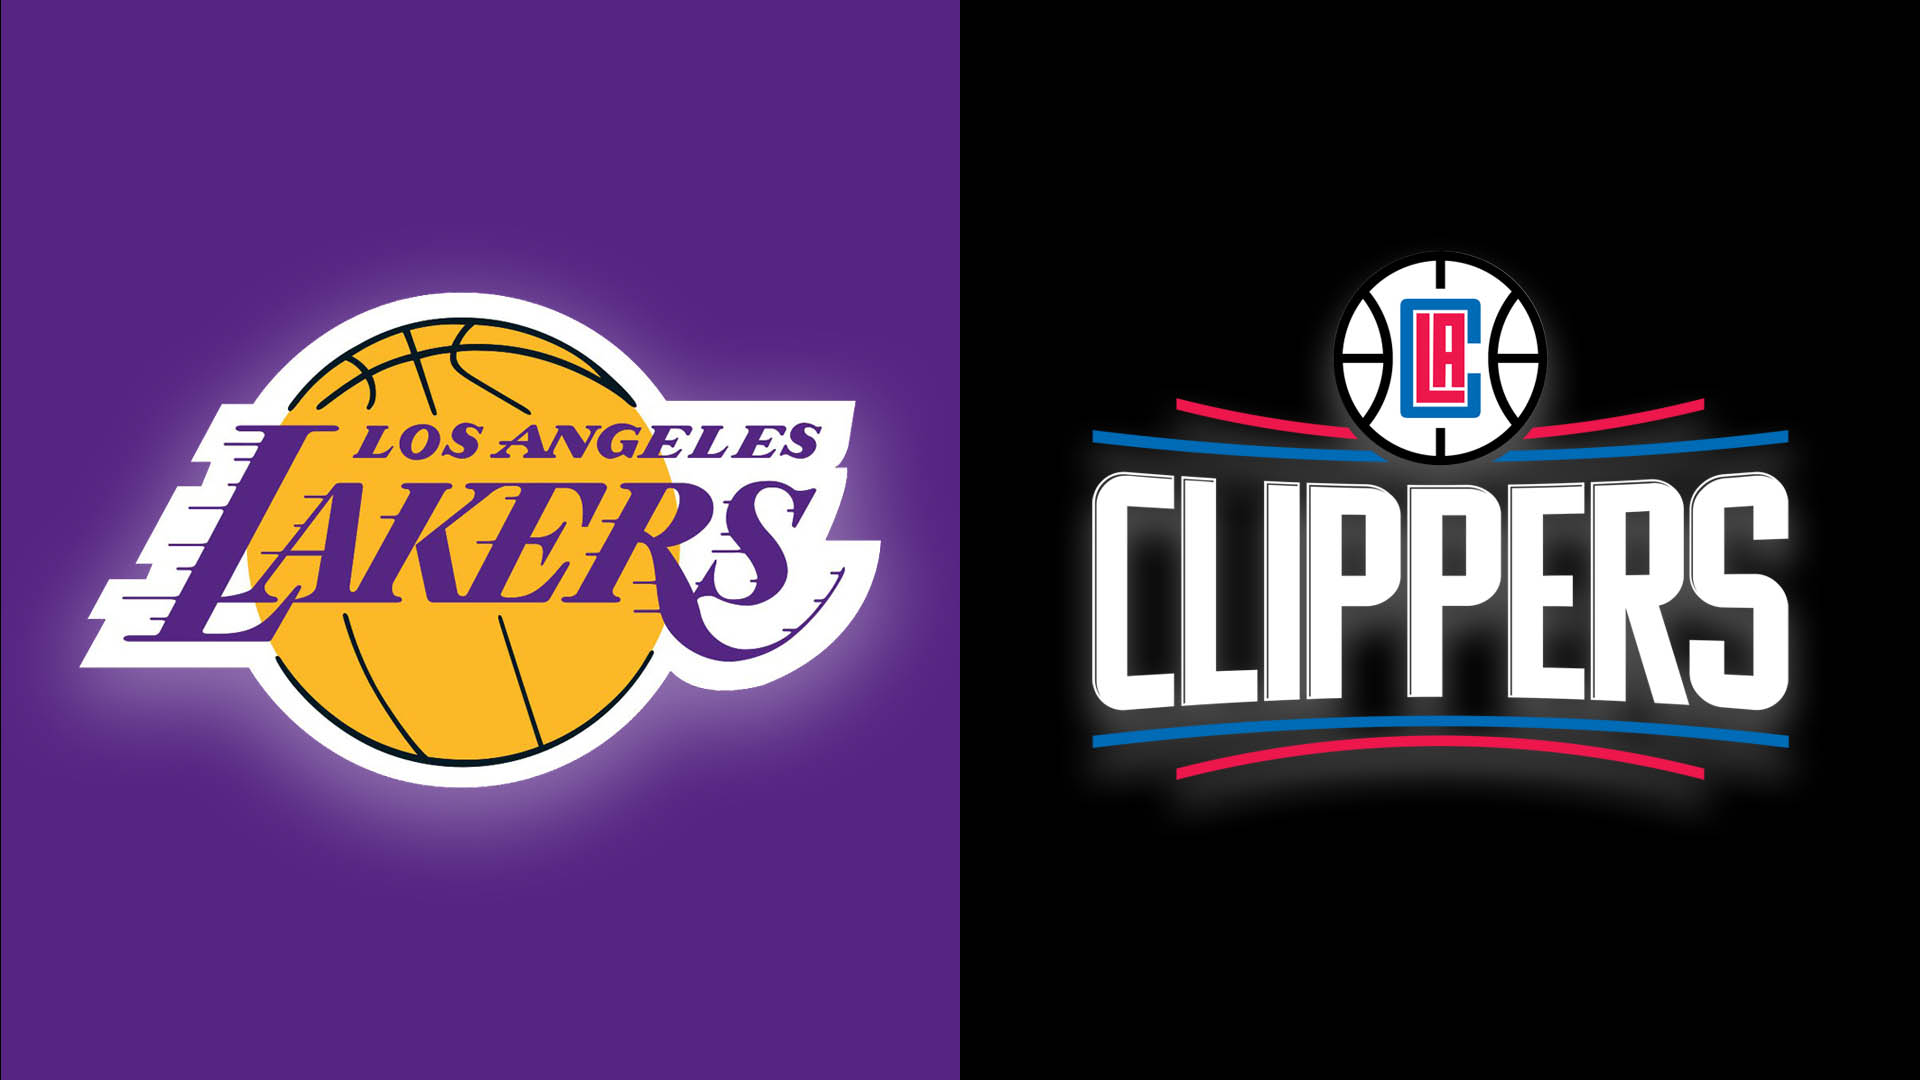 Los Angeles Lakers vs. Los Angeles Clippers Predictions & Preview